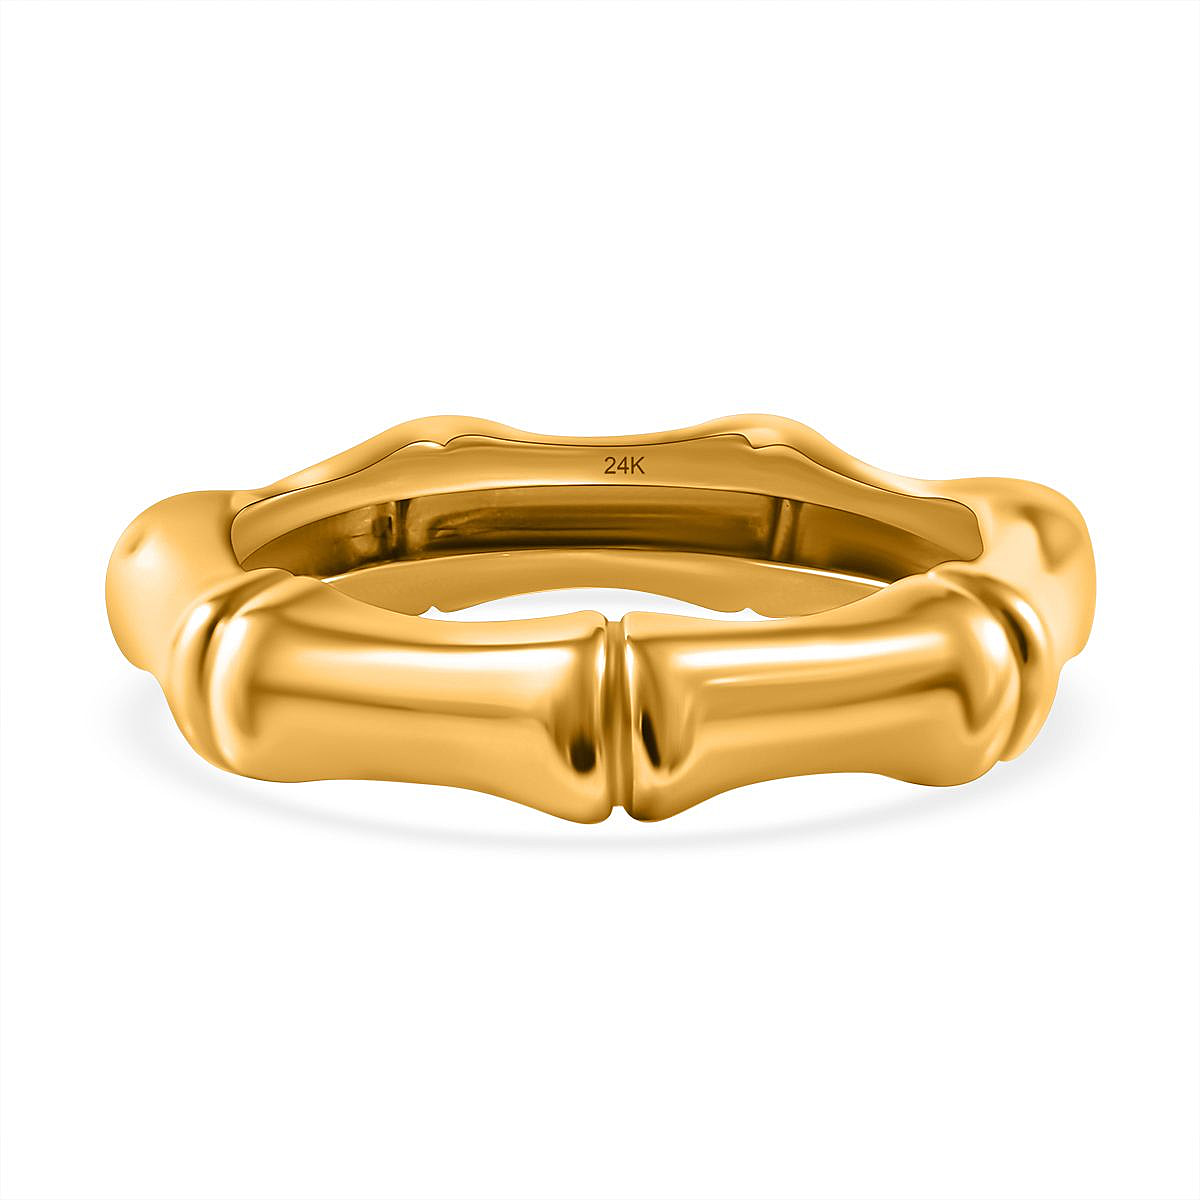 24K Yellow  Gold  Standard  Ring,  Gold Wt. 1.5 Gms